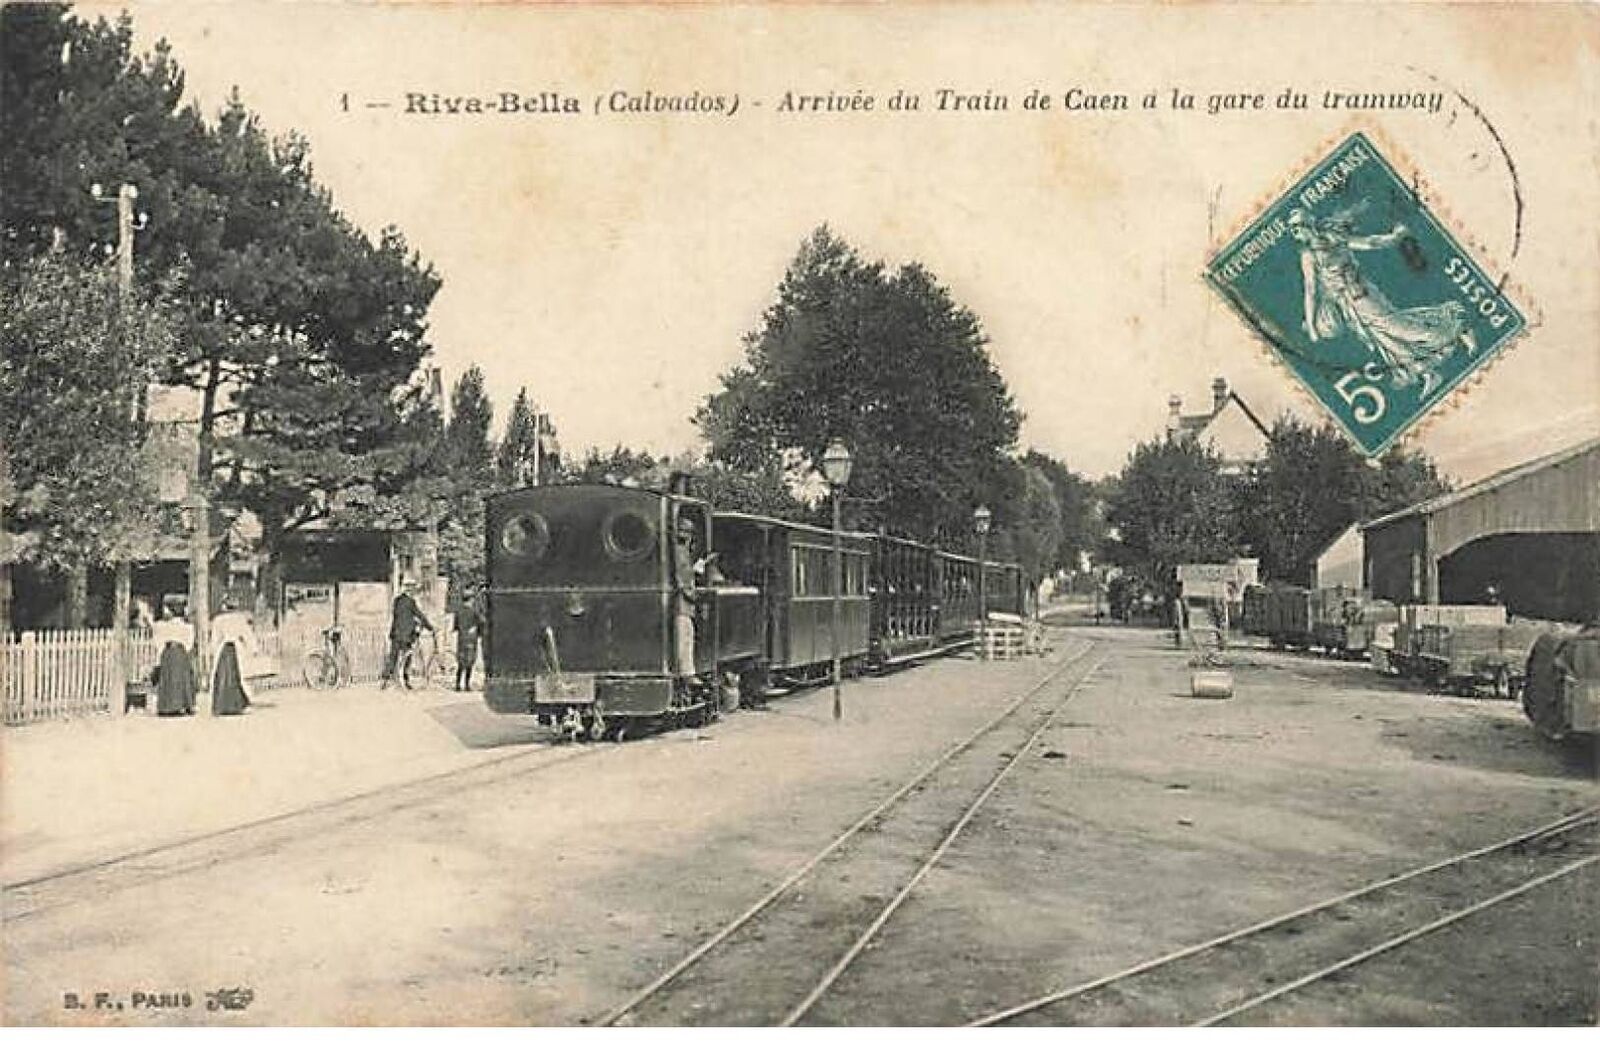 RIVA BELLA - Ouistreham - Arrival of the Caen train at the tram station